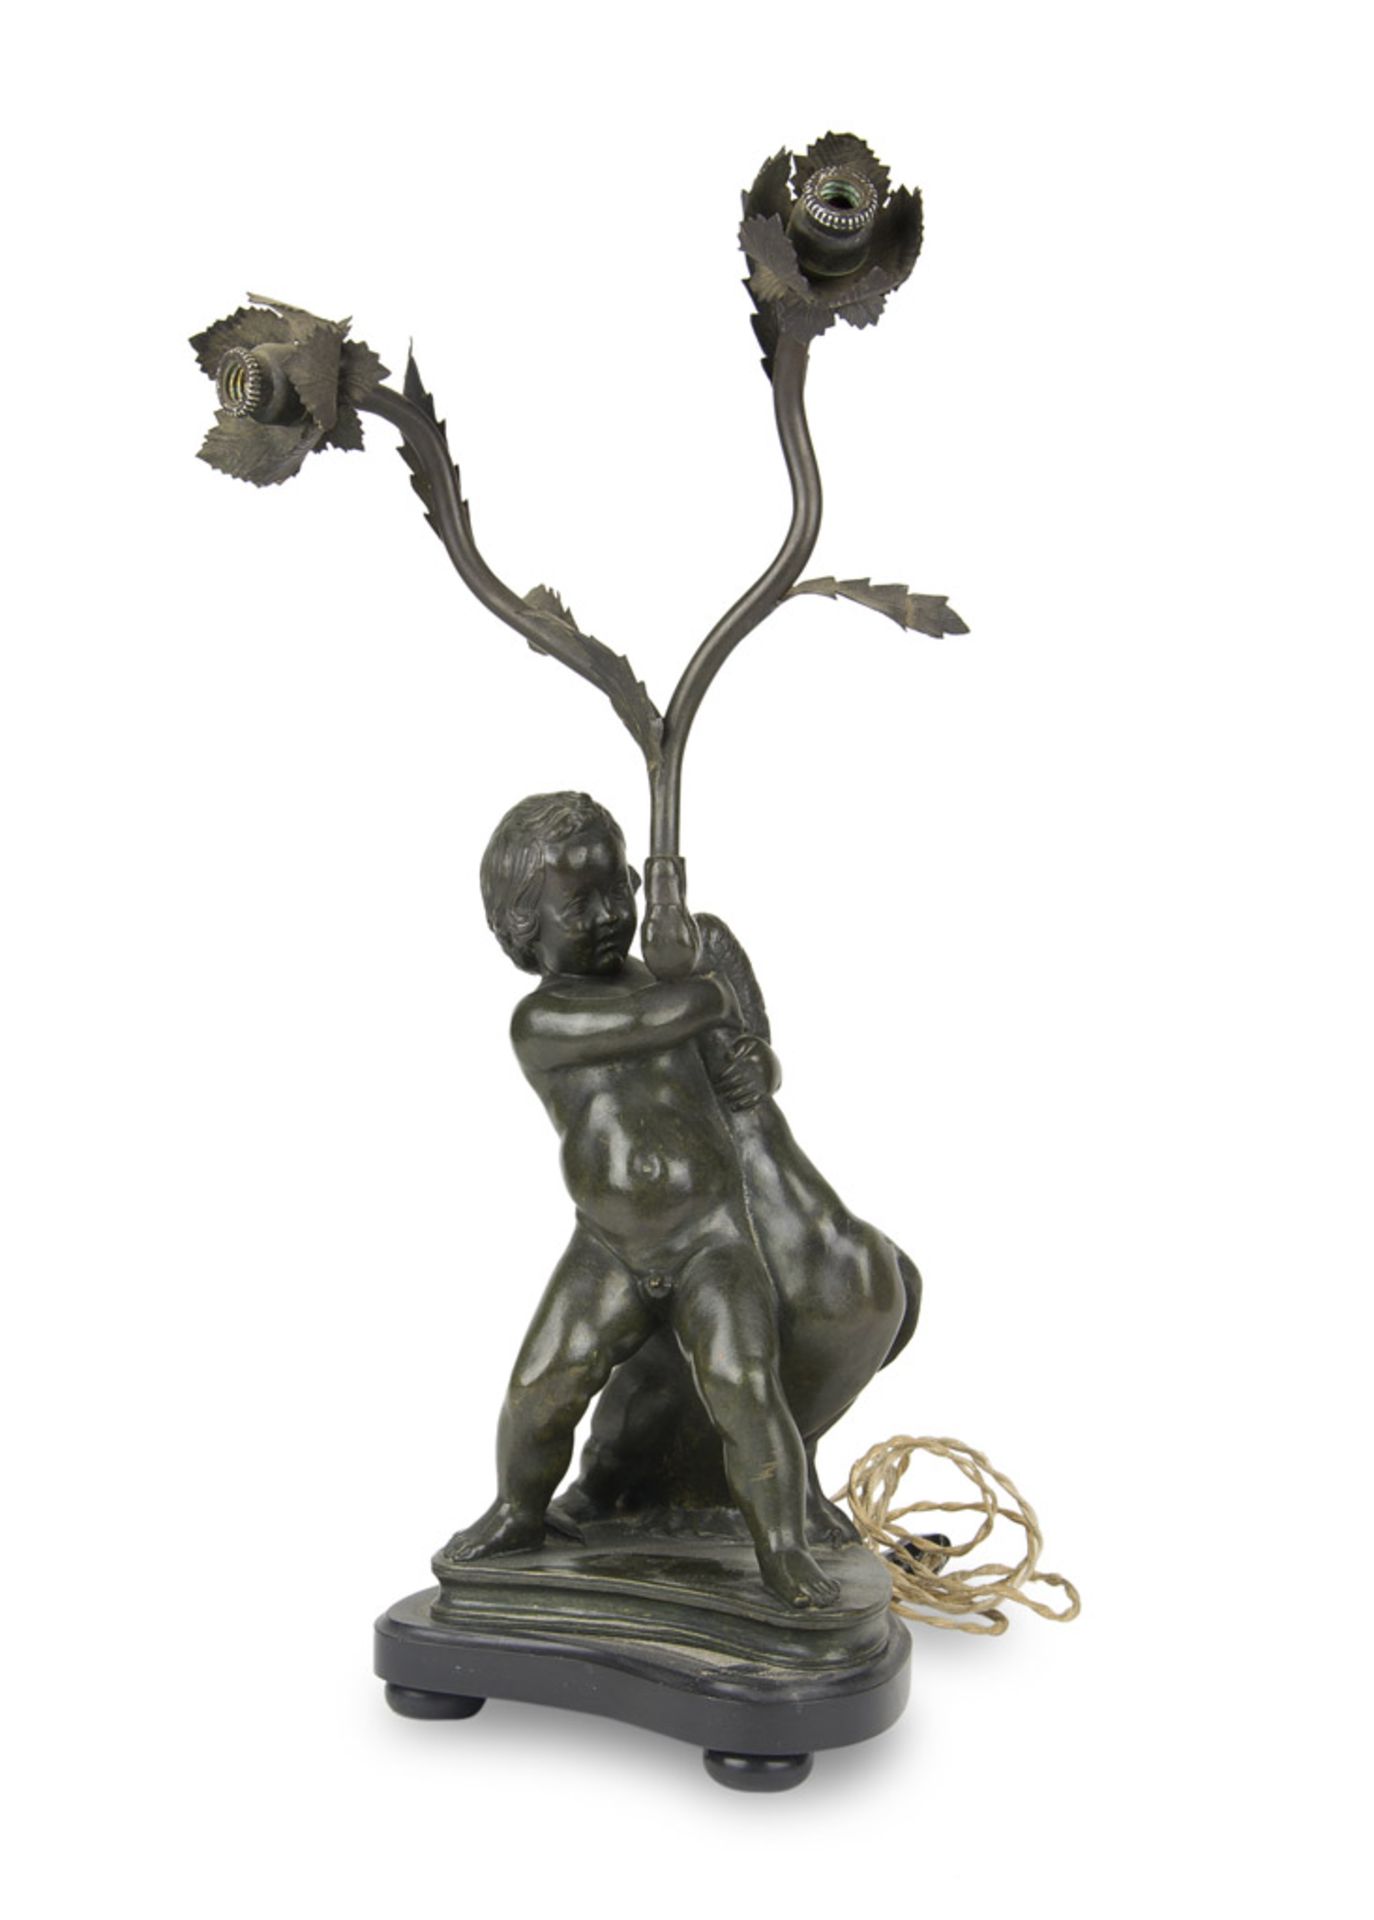 TWO-BRANCHED BRONZE CANDELSTICK, 19TH CENTURY of black patina, shaft with figure of cherub